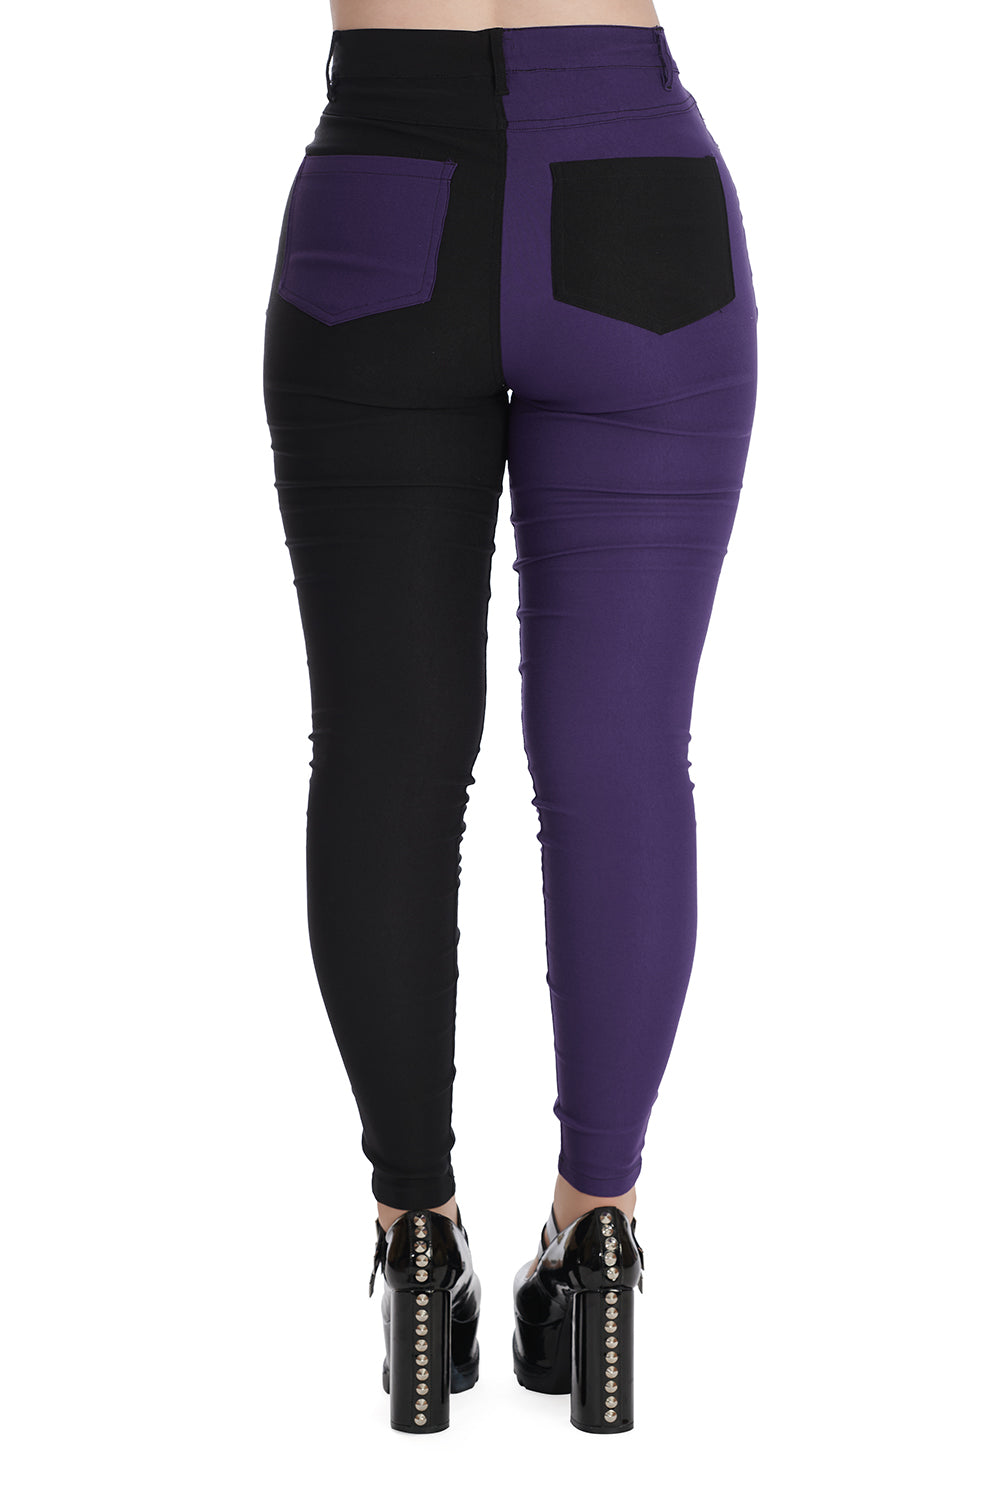 Banned Apparel Bailey Half & Half Black and Purple Trousers